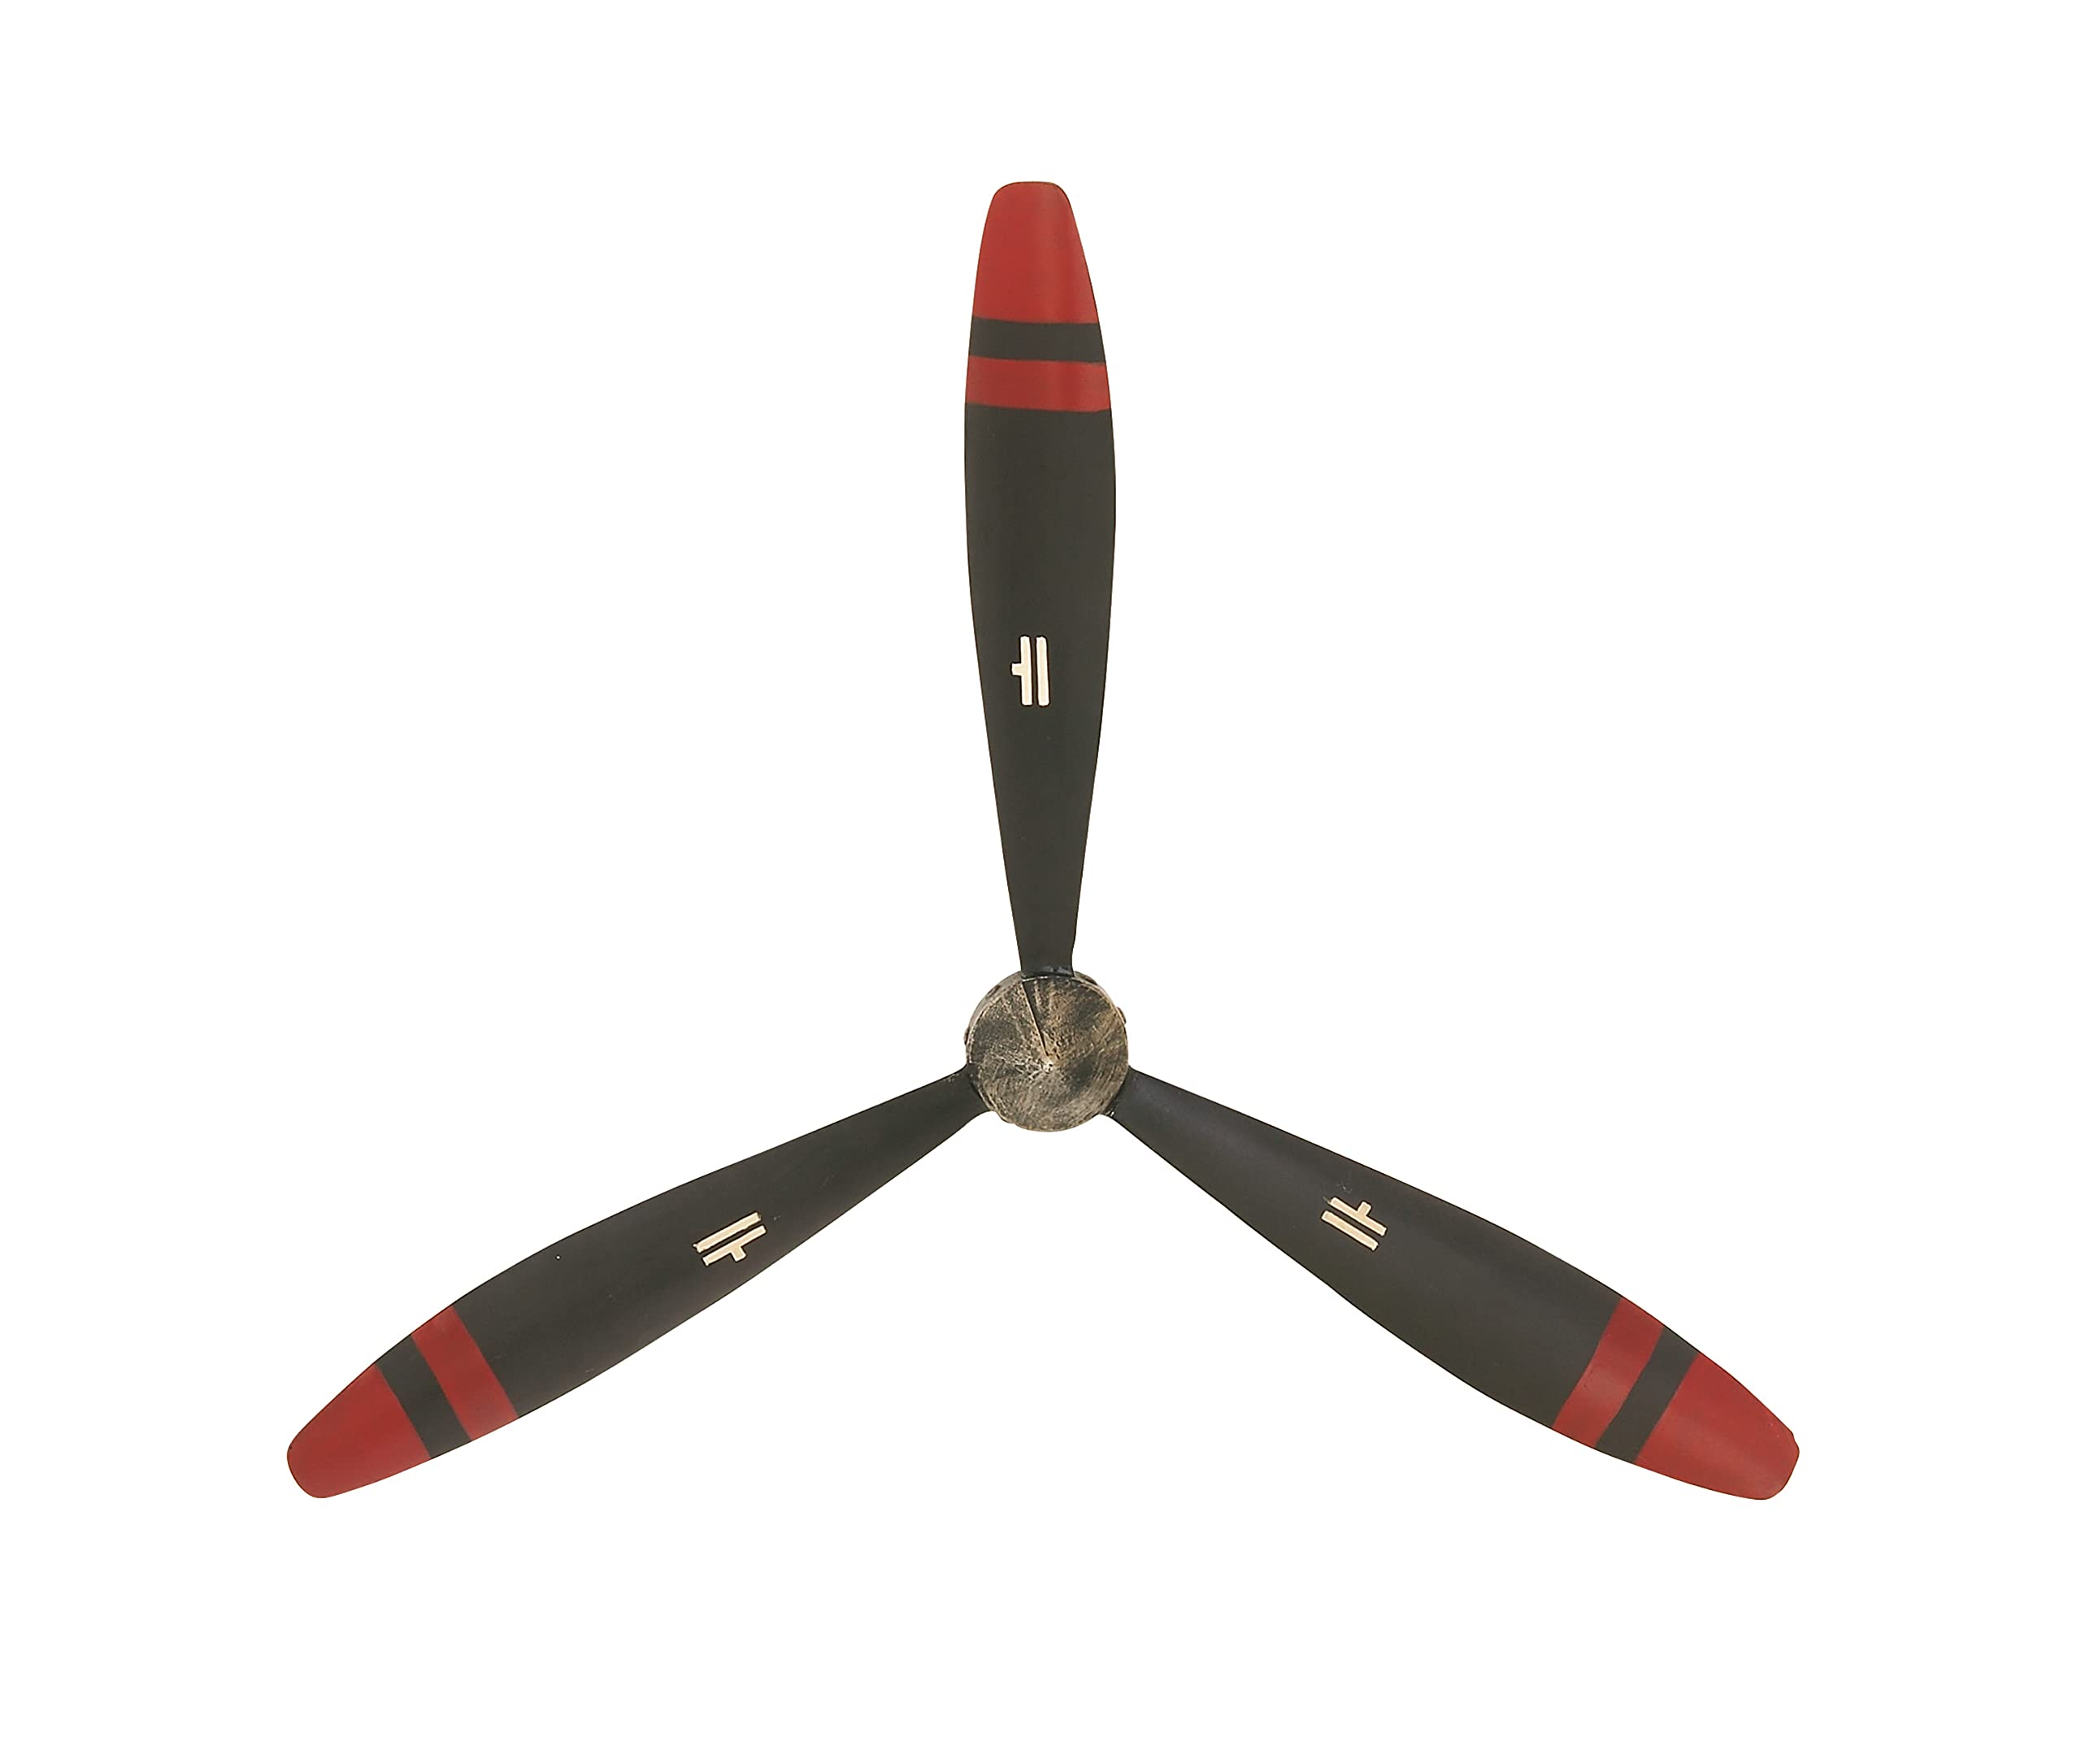 Deco 79 Metal Airplane Propeller 3 Blade Wall Decor with Aviation Detailing, 22